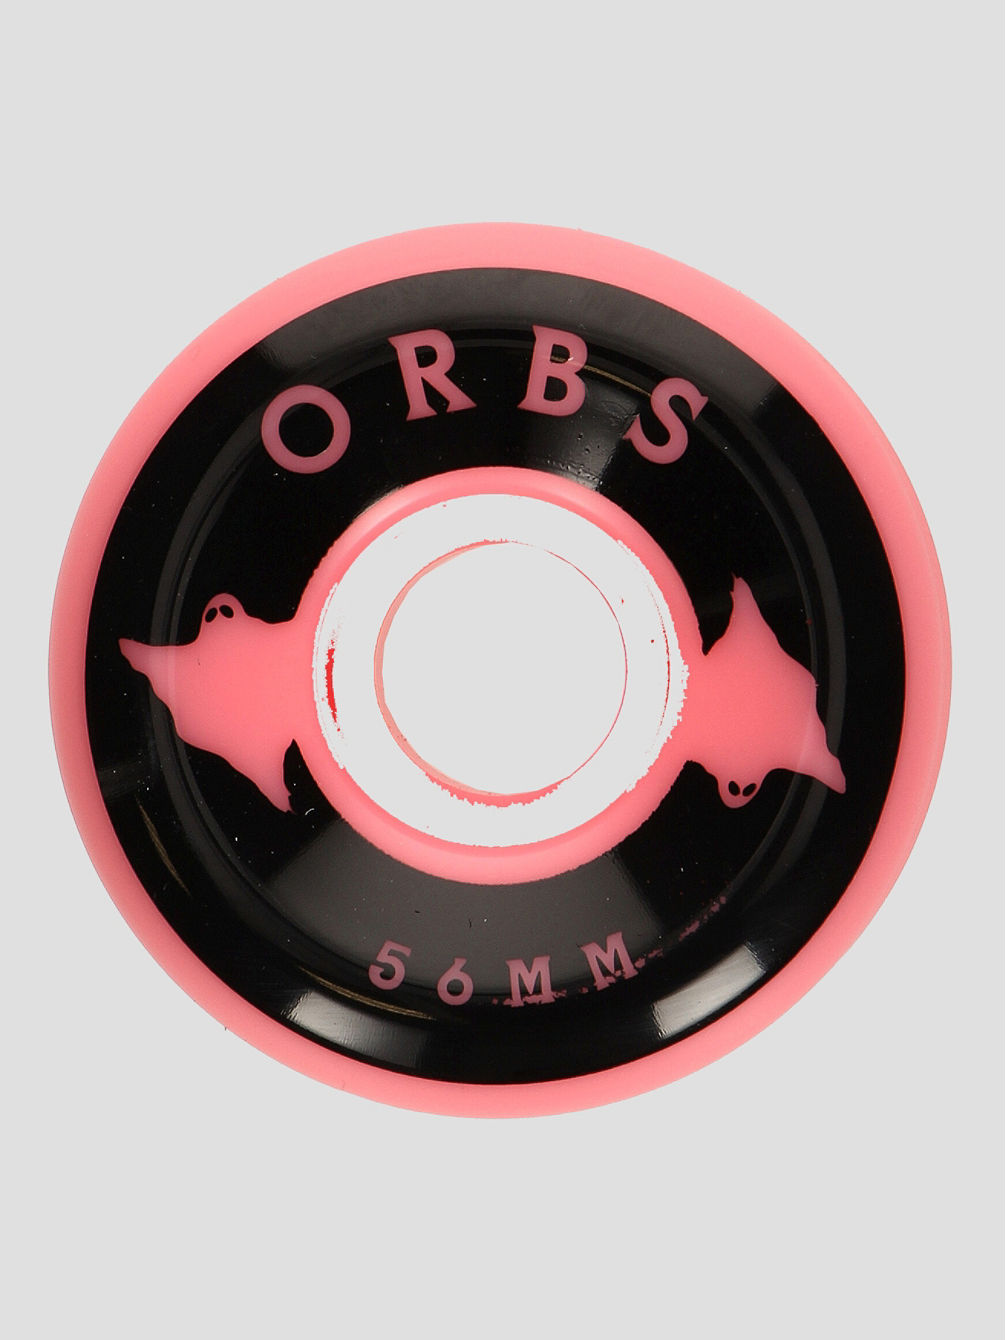 Orbs Specters - Conical - 99A 56mm Rodas